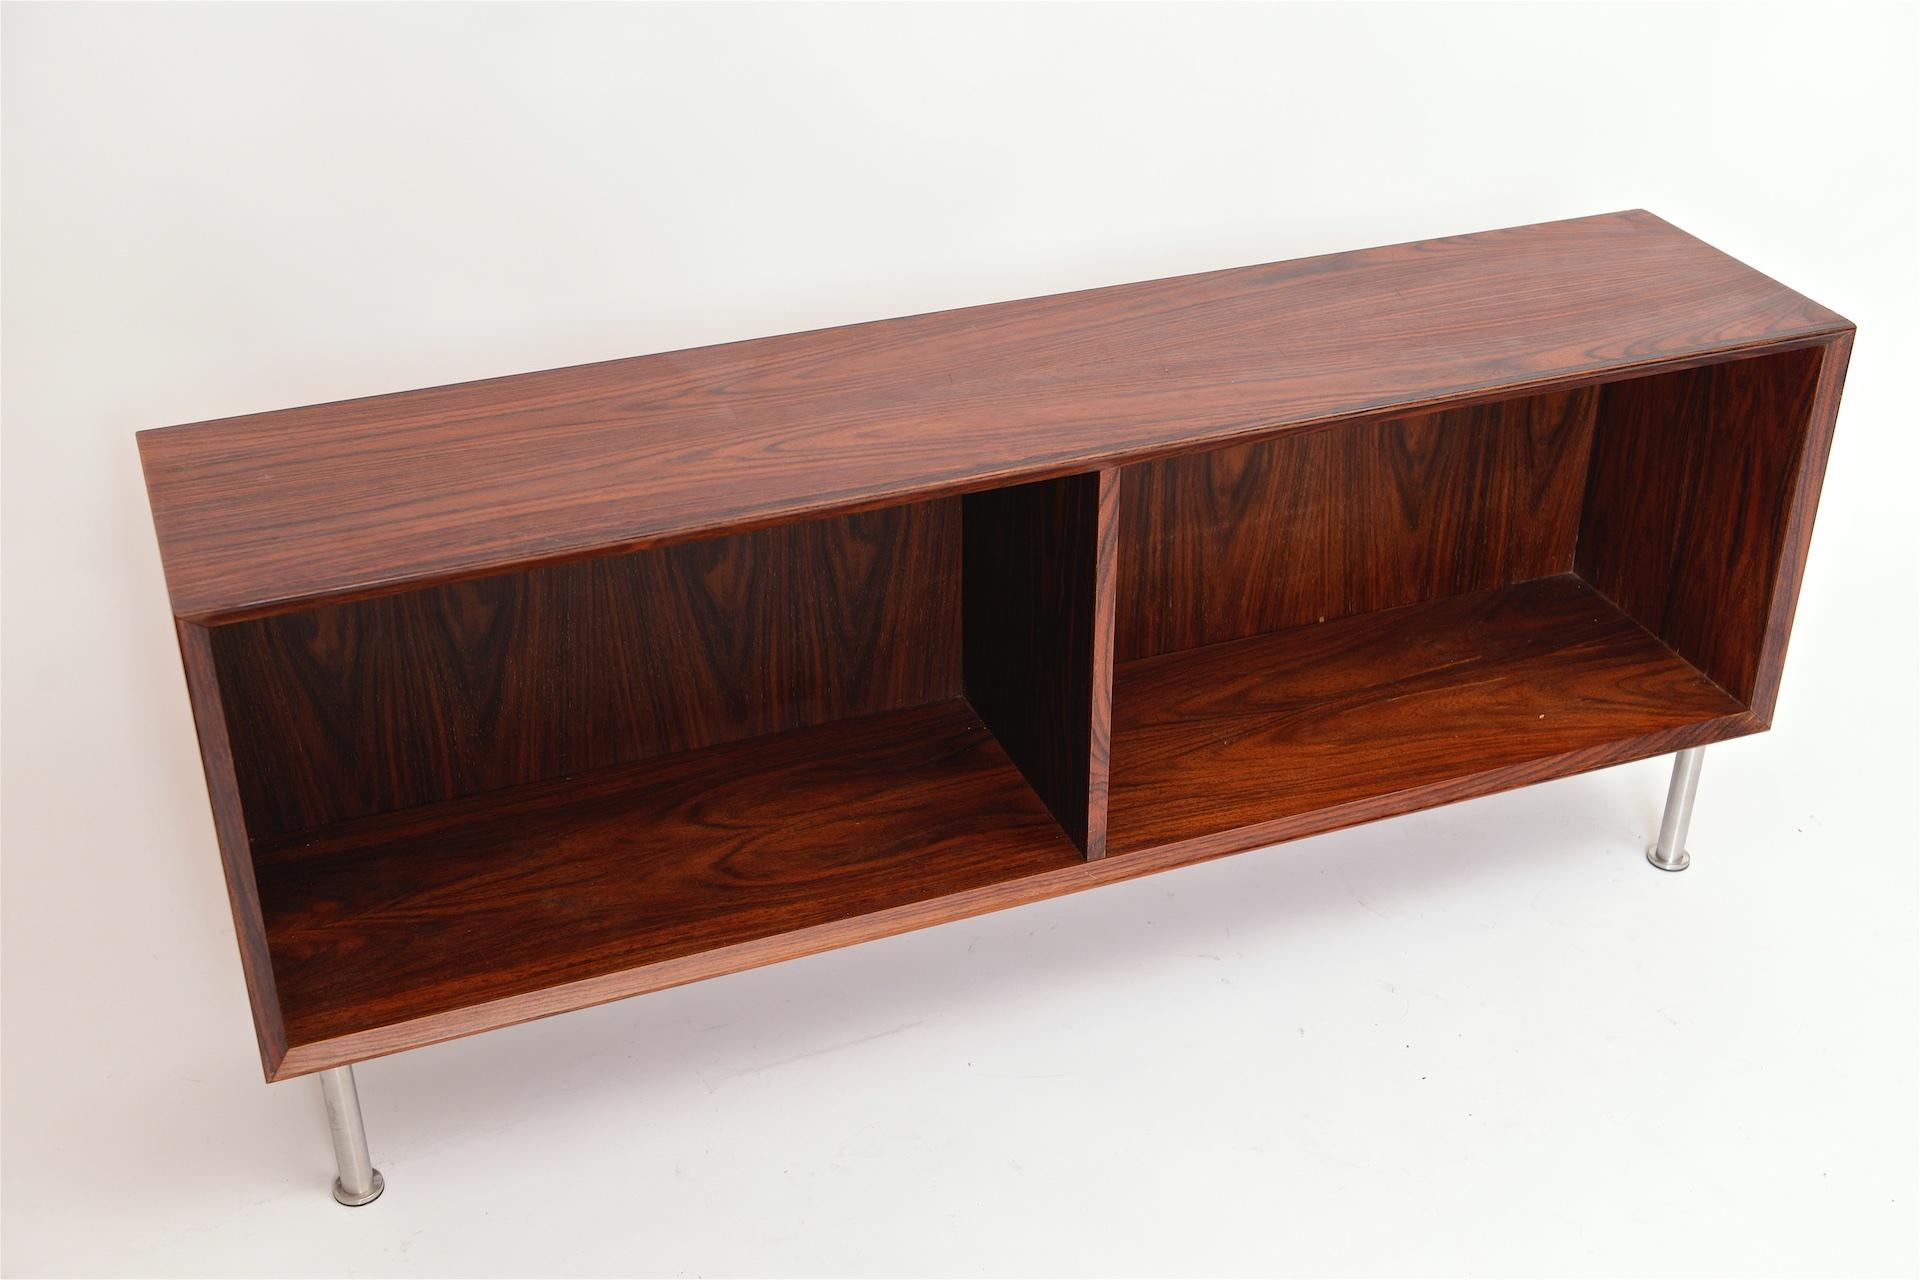 Rosewood and chrome cabinets similar to Merrow Associates

Three available.